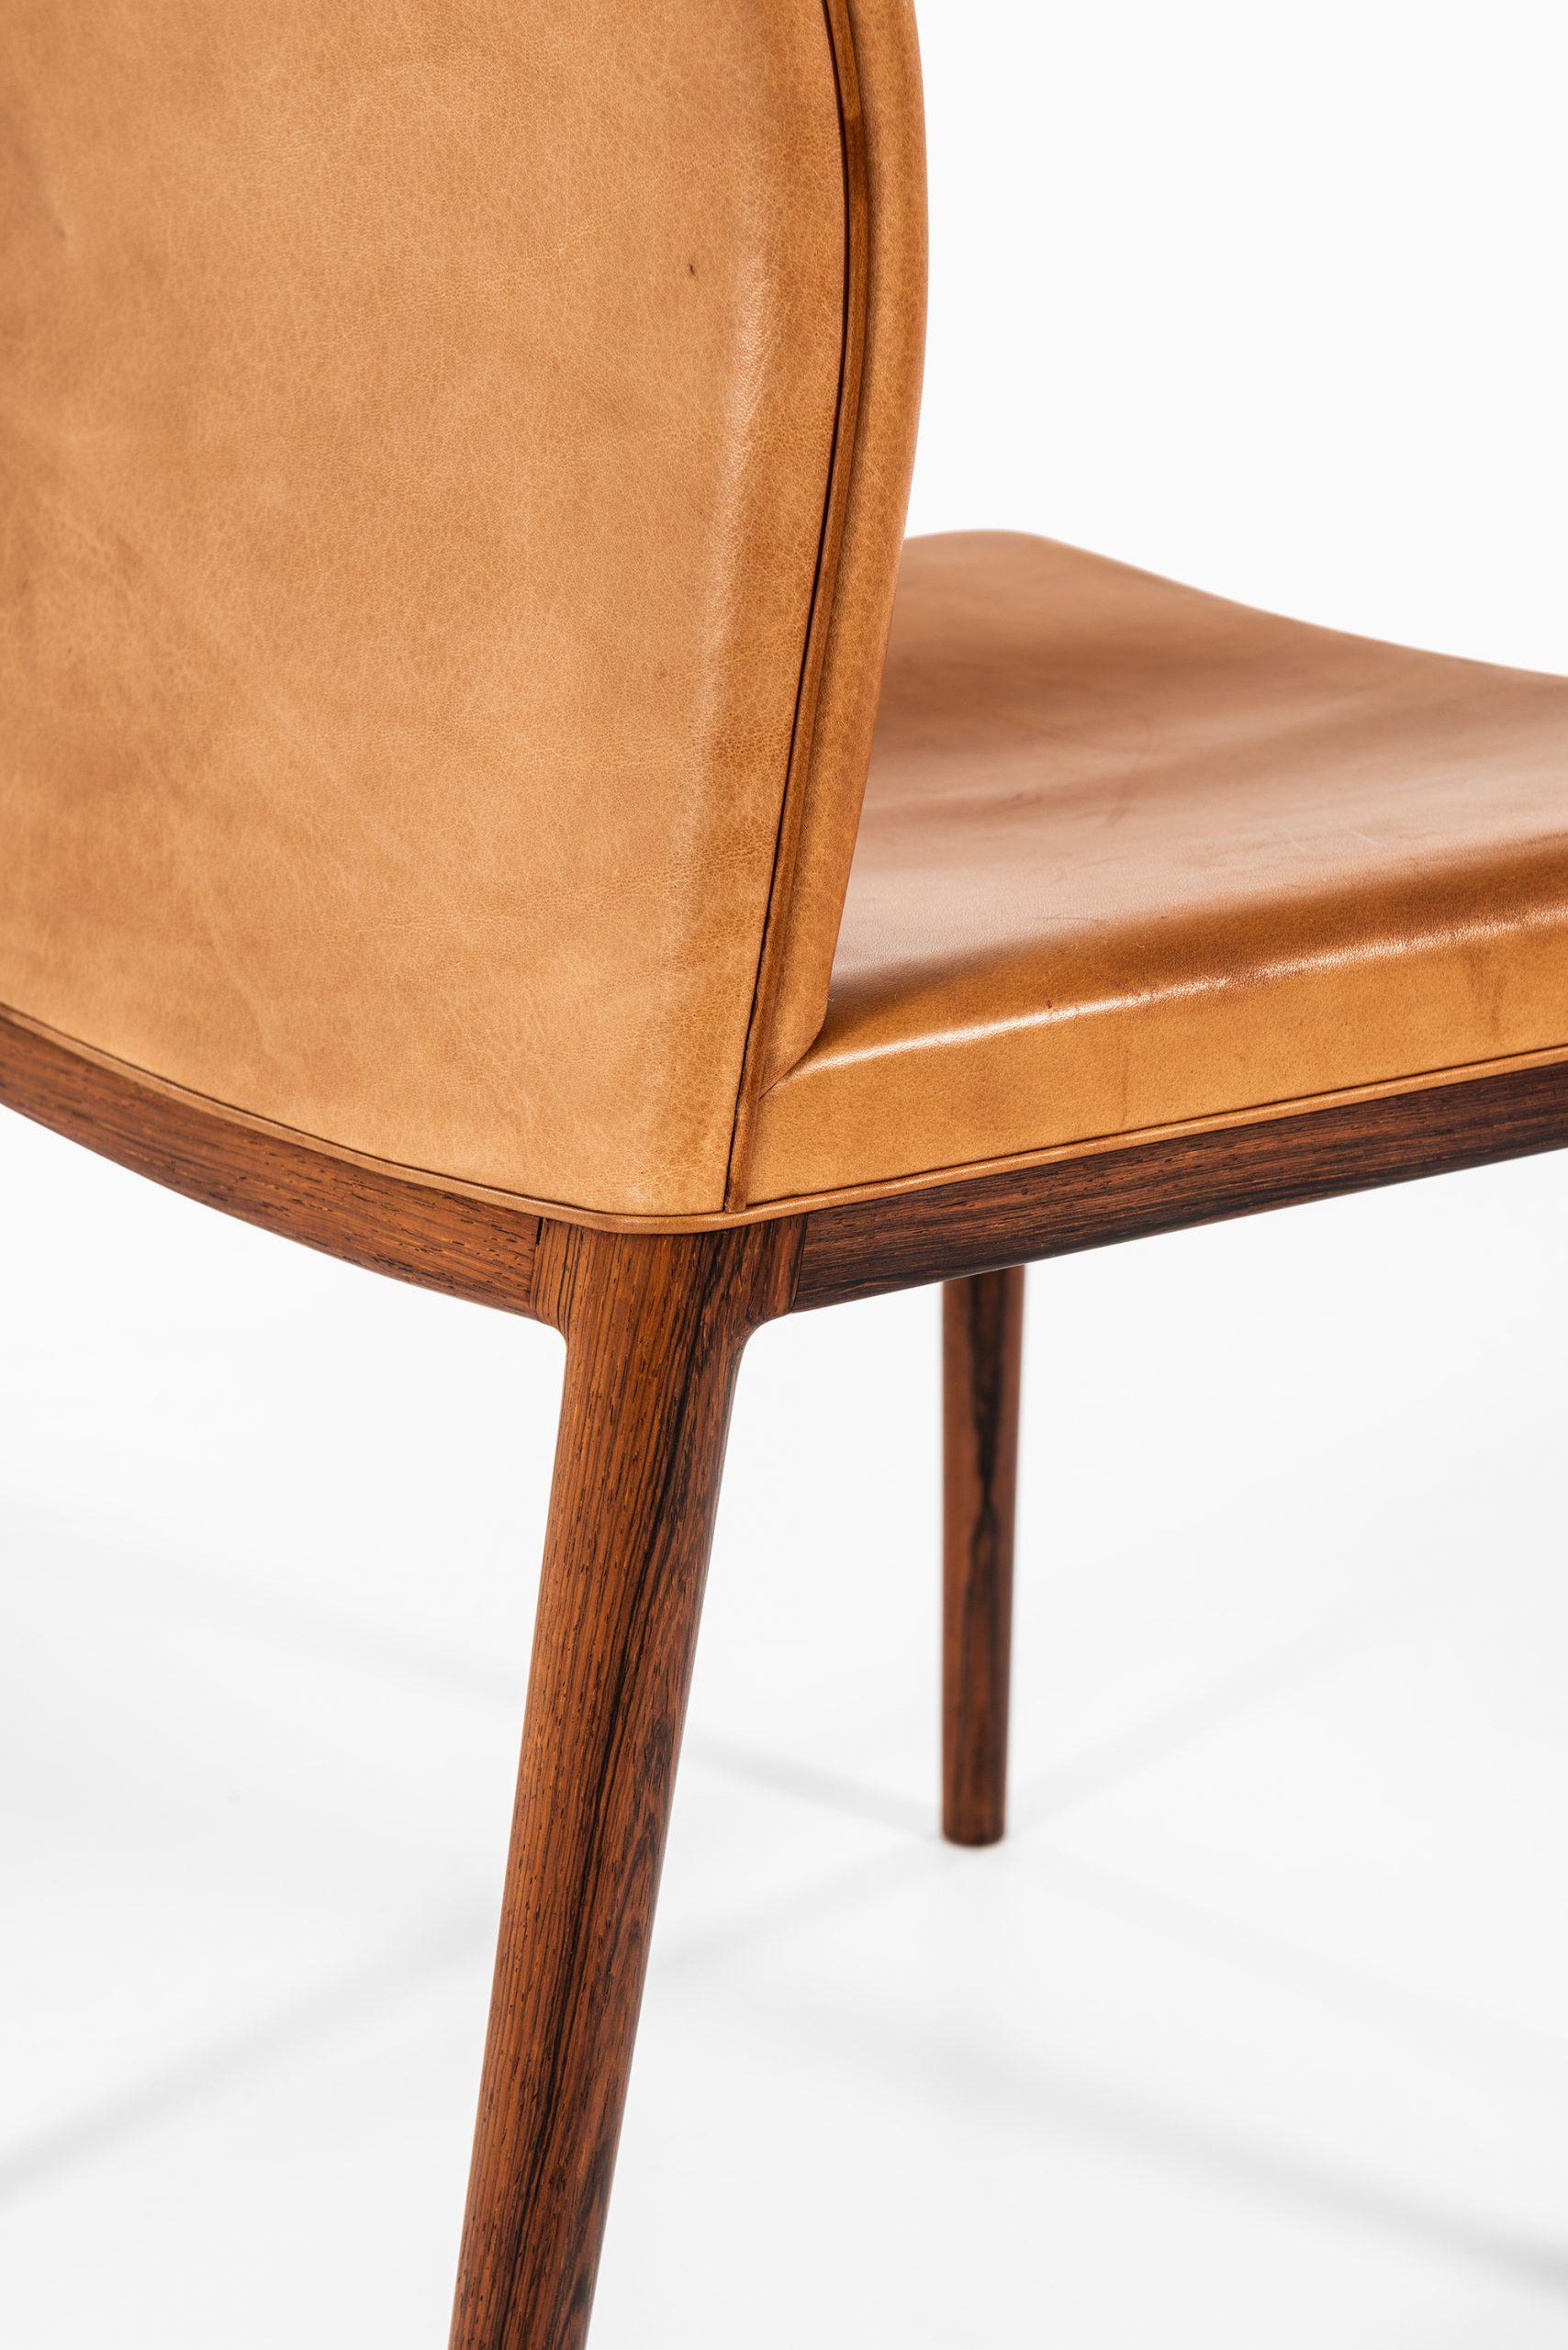 Helge Vestergaard Jensen Dining Chairs Produced by P. Jensen & Co. Cabinetmakers For Sale 2